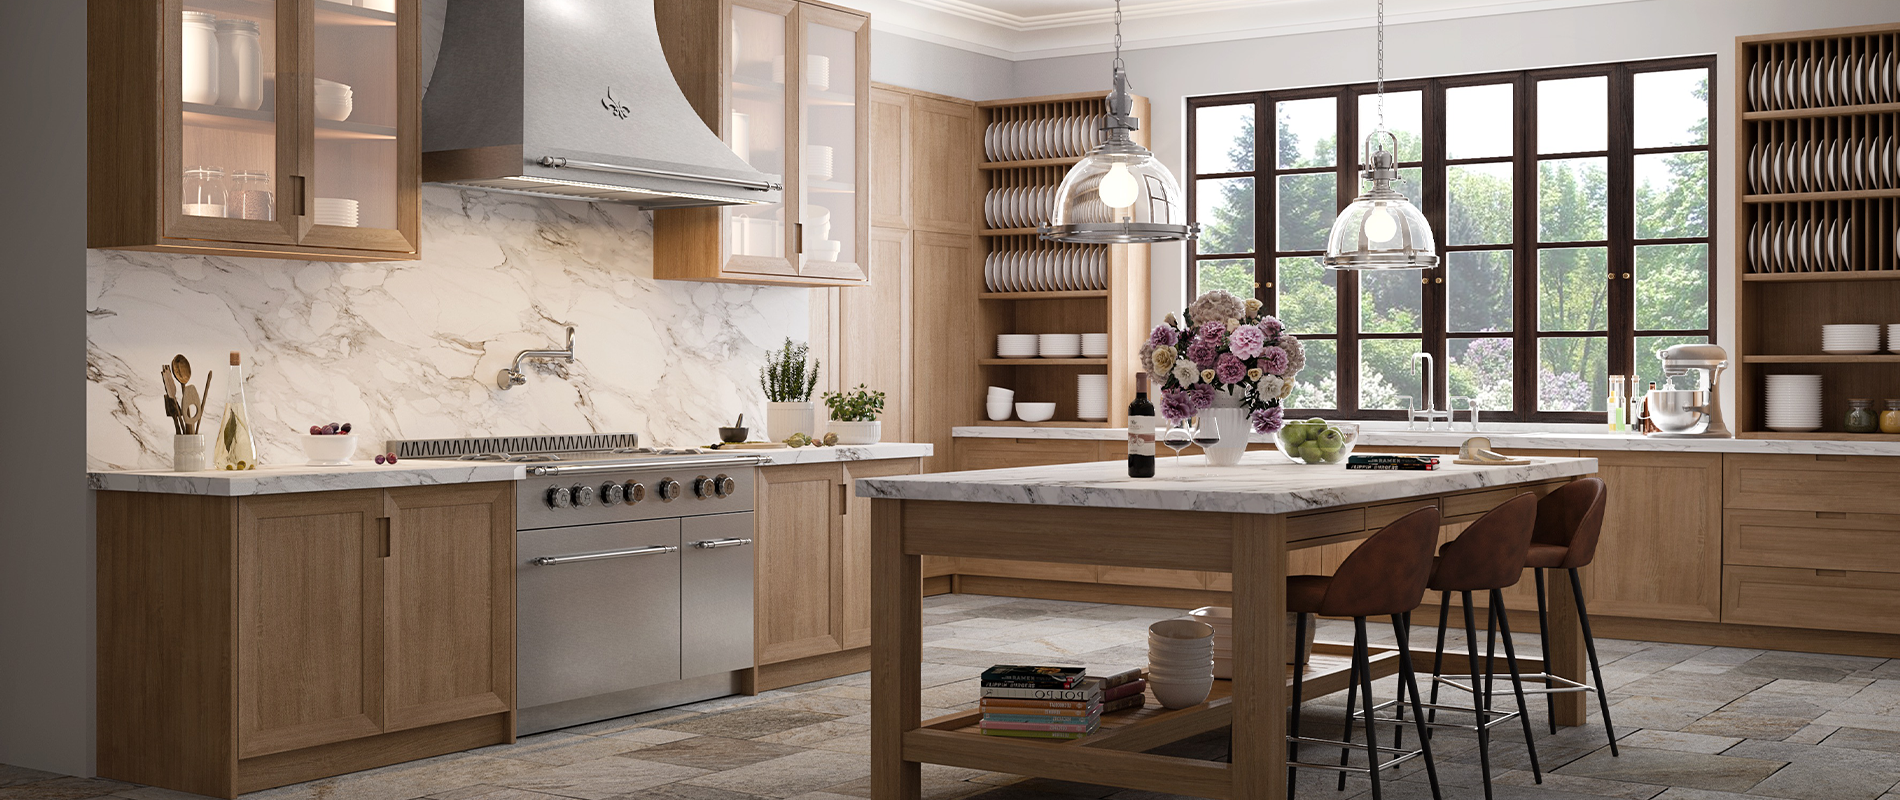 Silver classic kitchen ranges including French stove, burners and silver luxury kitchen hood above cooking ranges. Wooden hanging and base cabinets across Kitchen